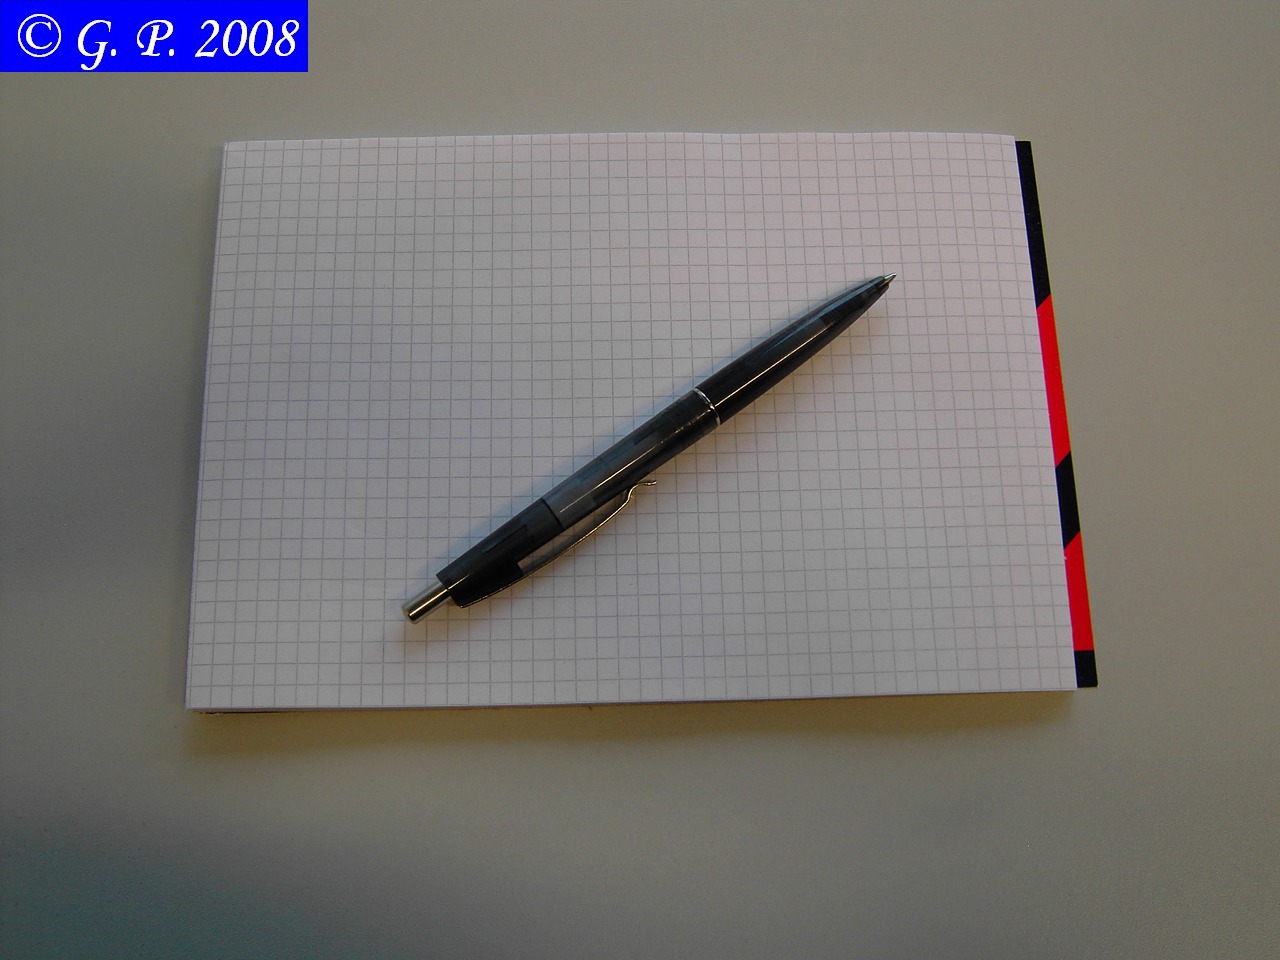 a pen resting on top of a notepad